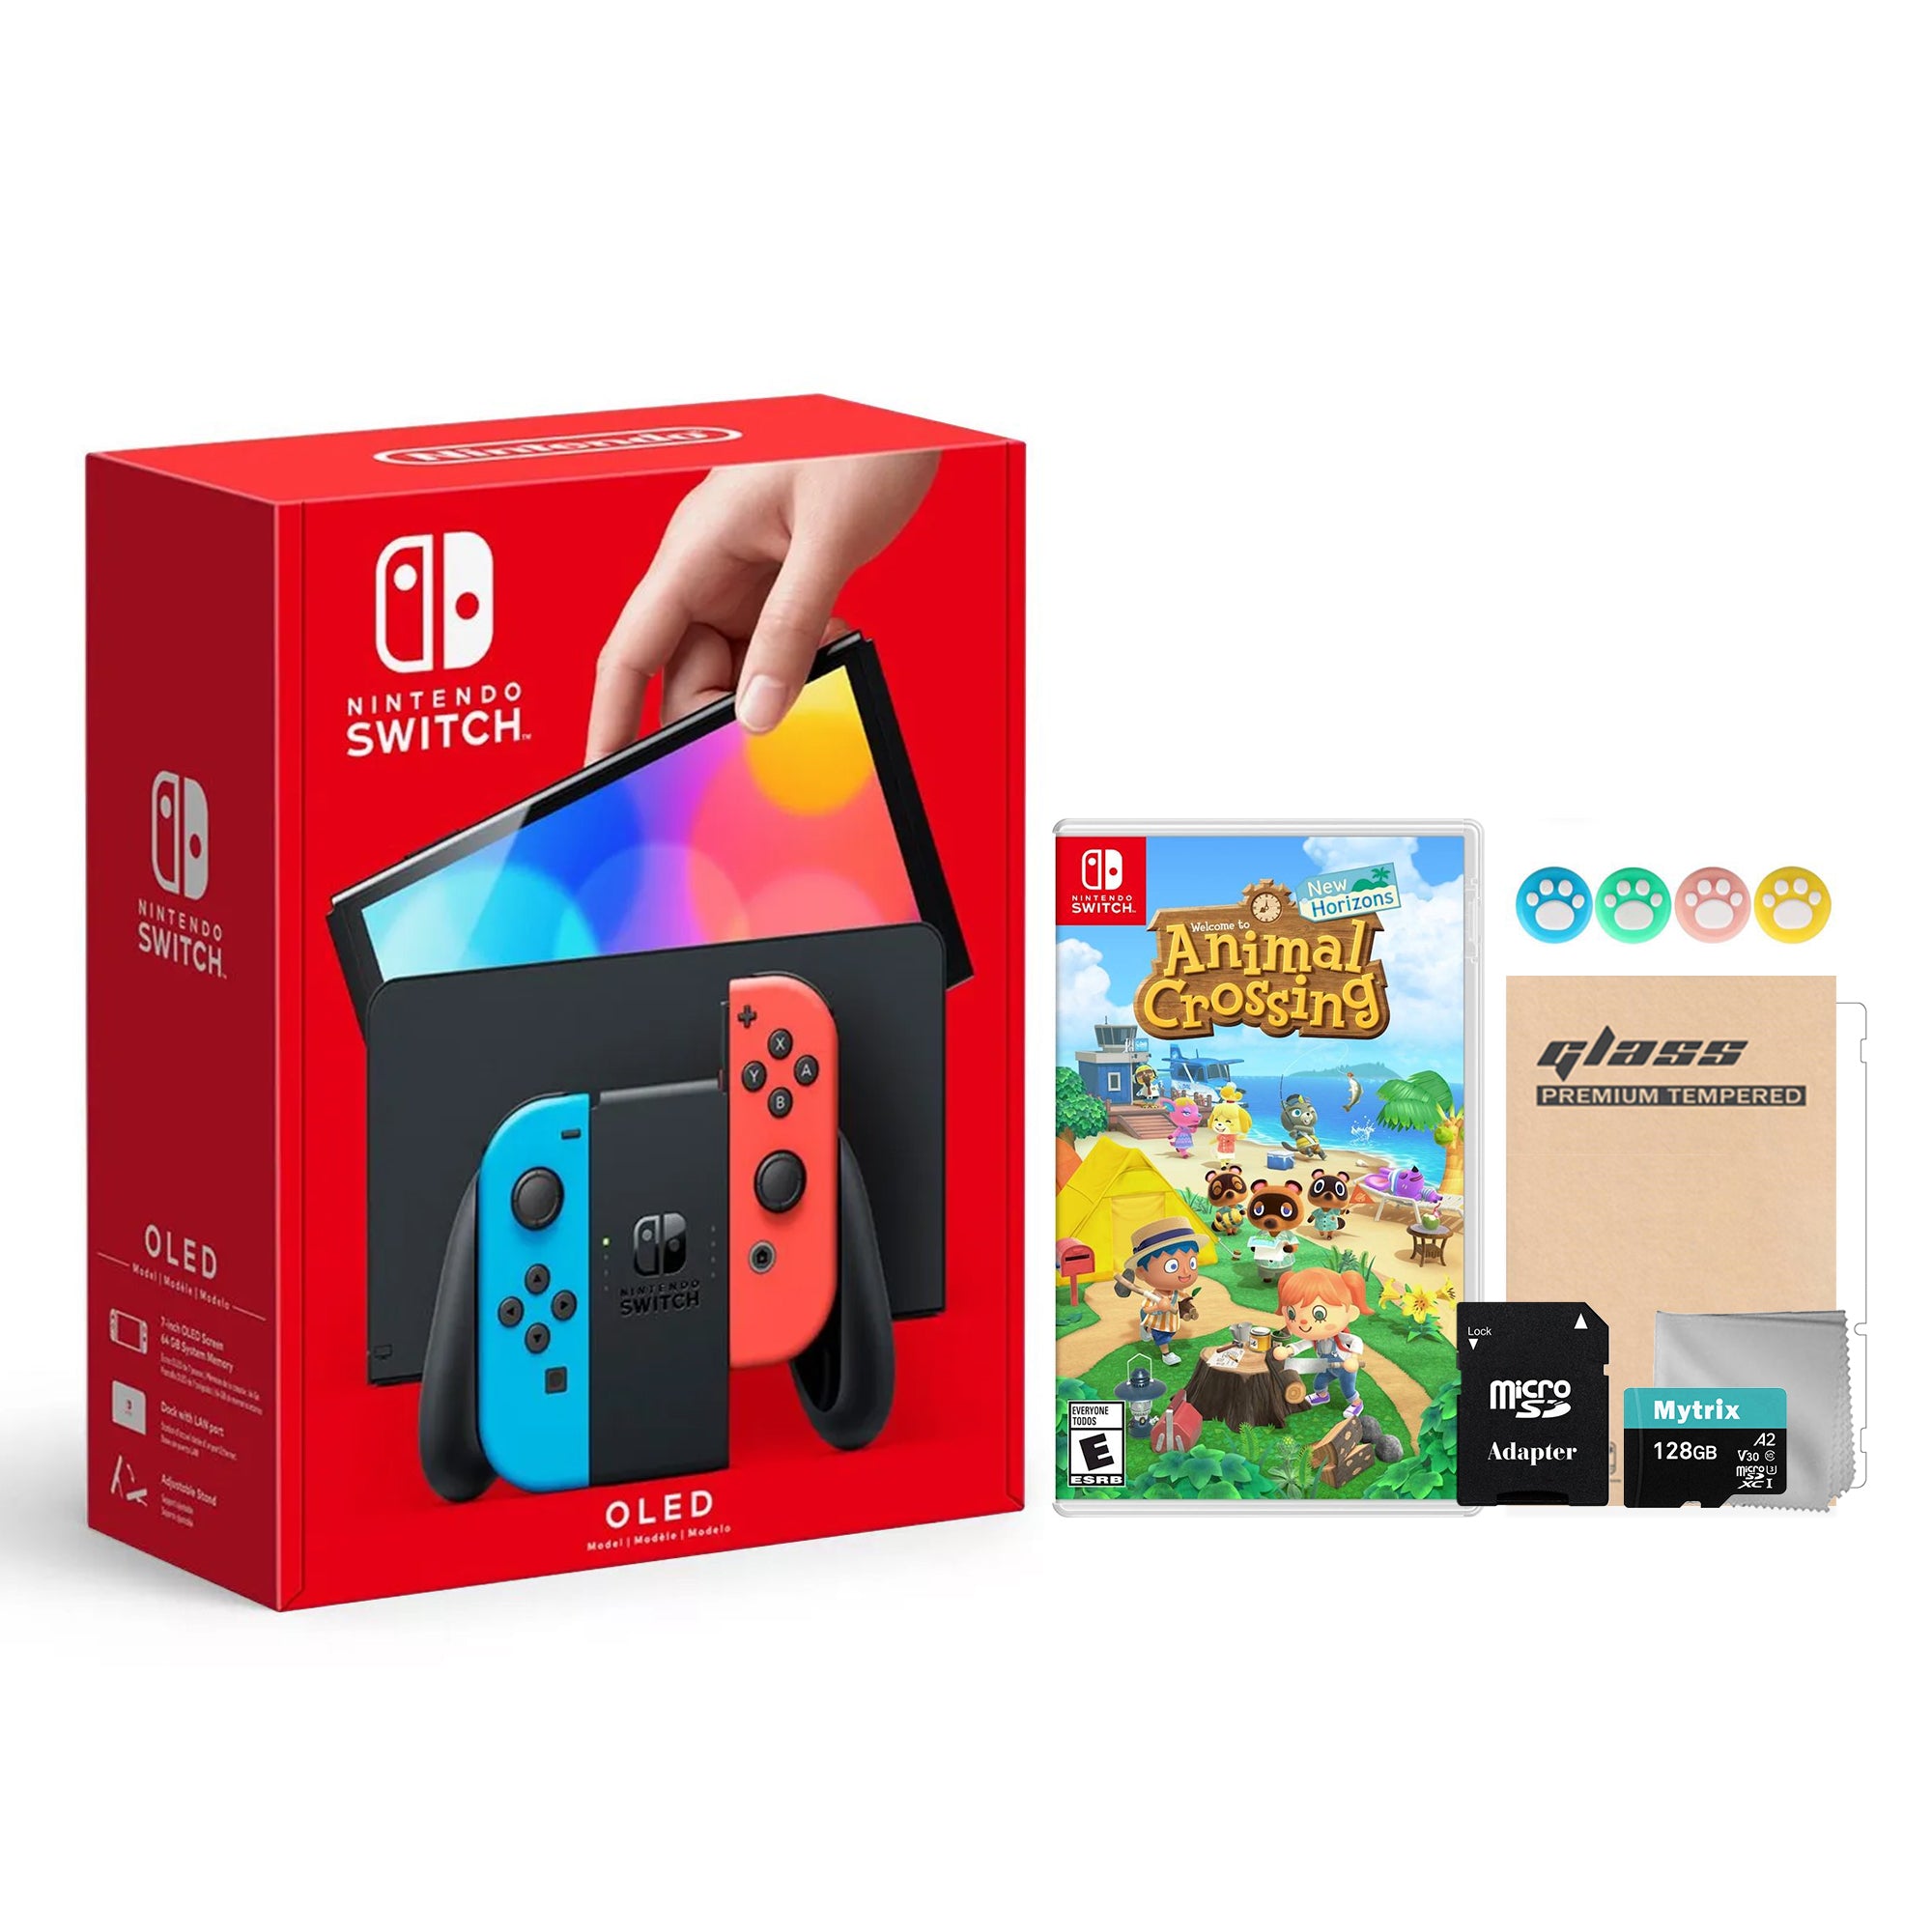 2022 New Nintendo Switch OLED Model Neon Red & Blue Joy Con 64GB Console HD Screen & LAN-Port Dock with Animal Crossing: New Horizons, Mytrix 128GB MicroSD Card and Accessories